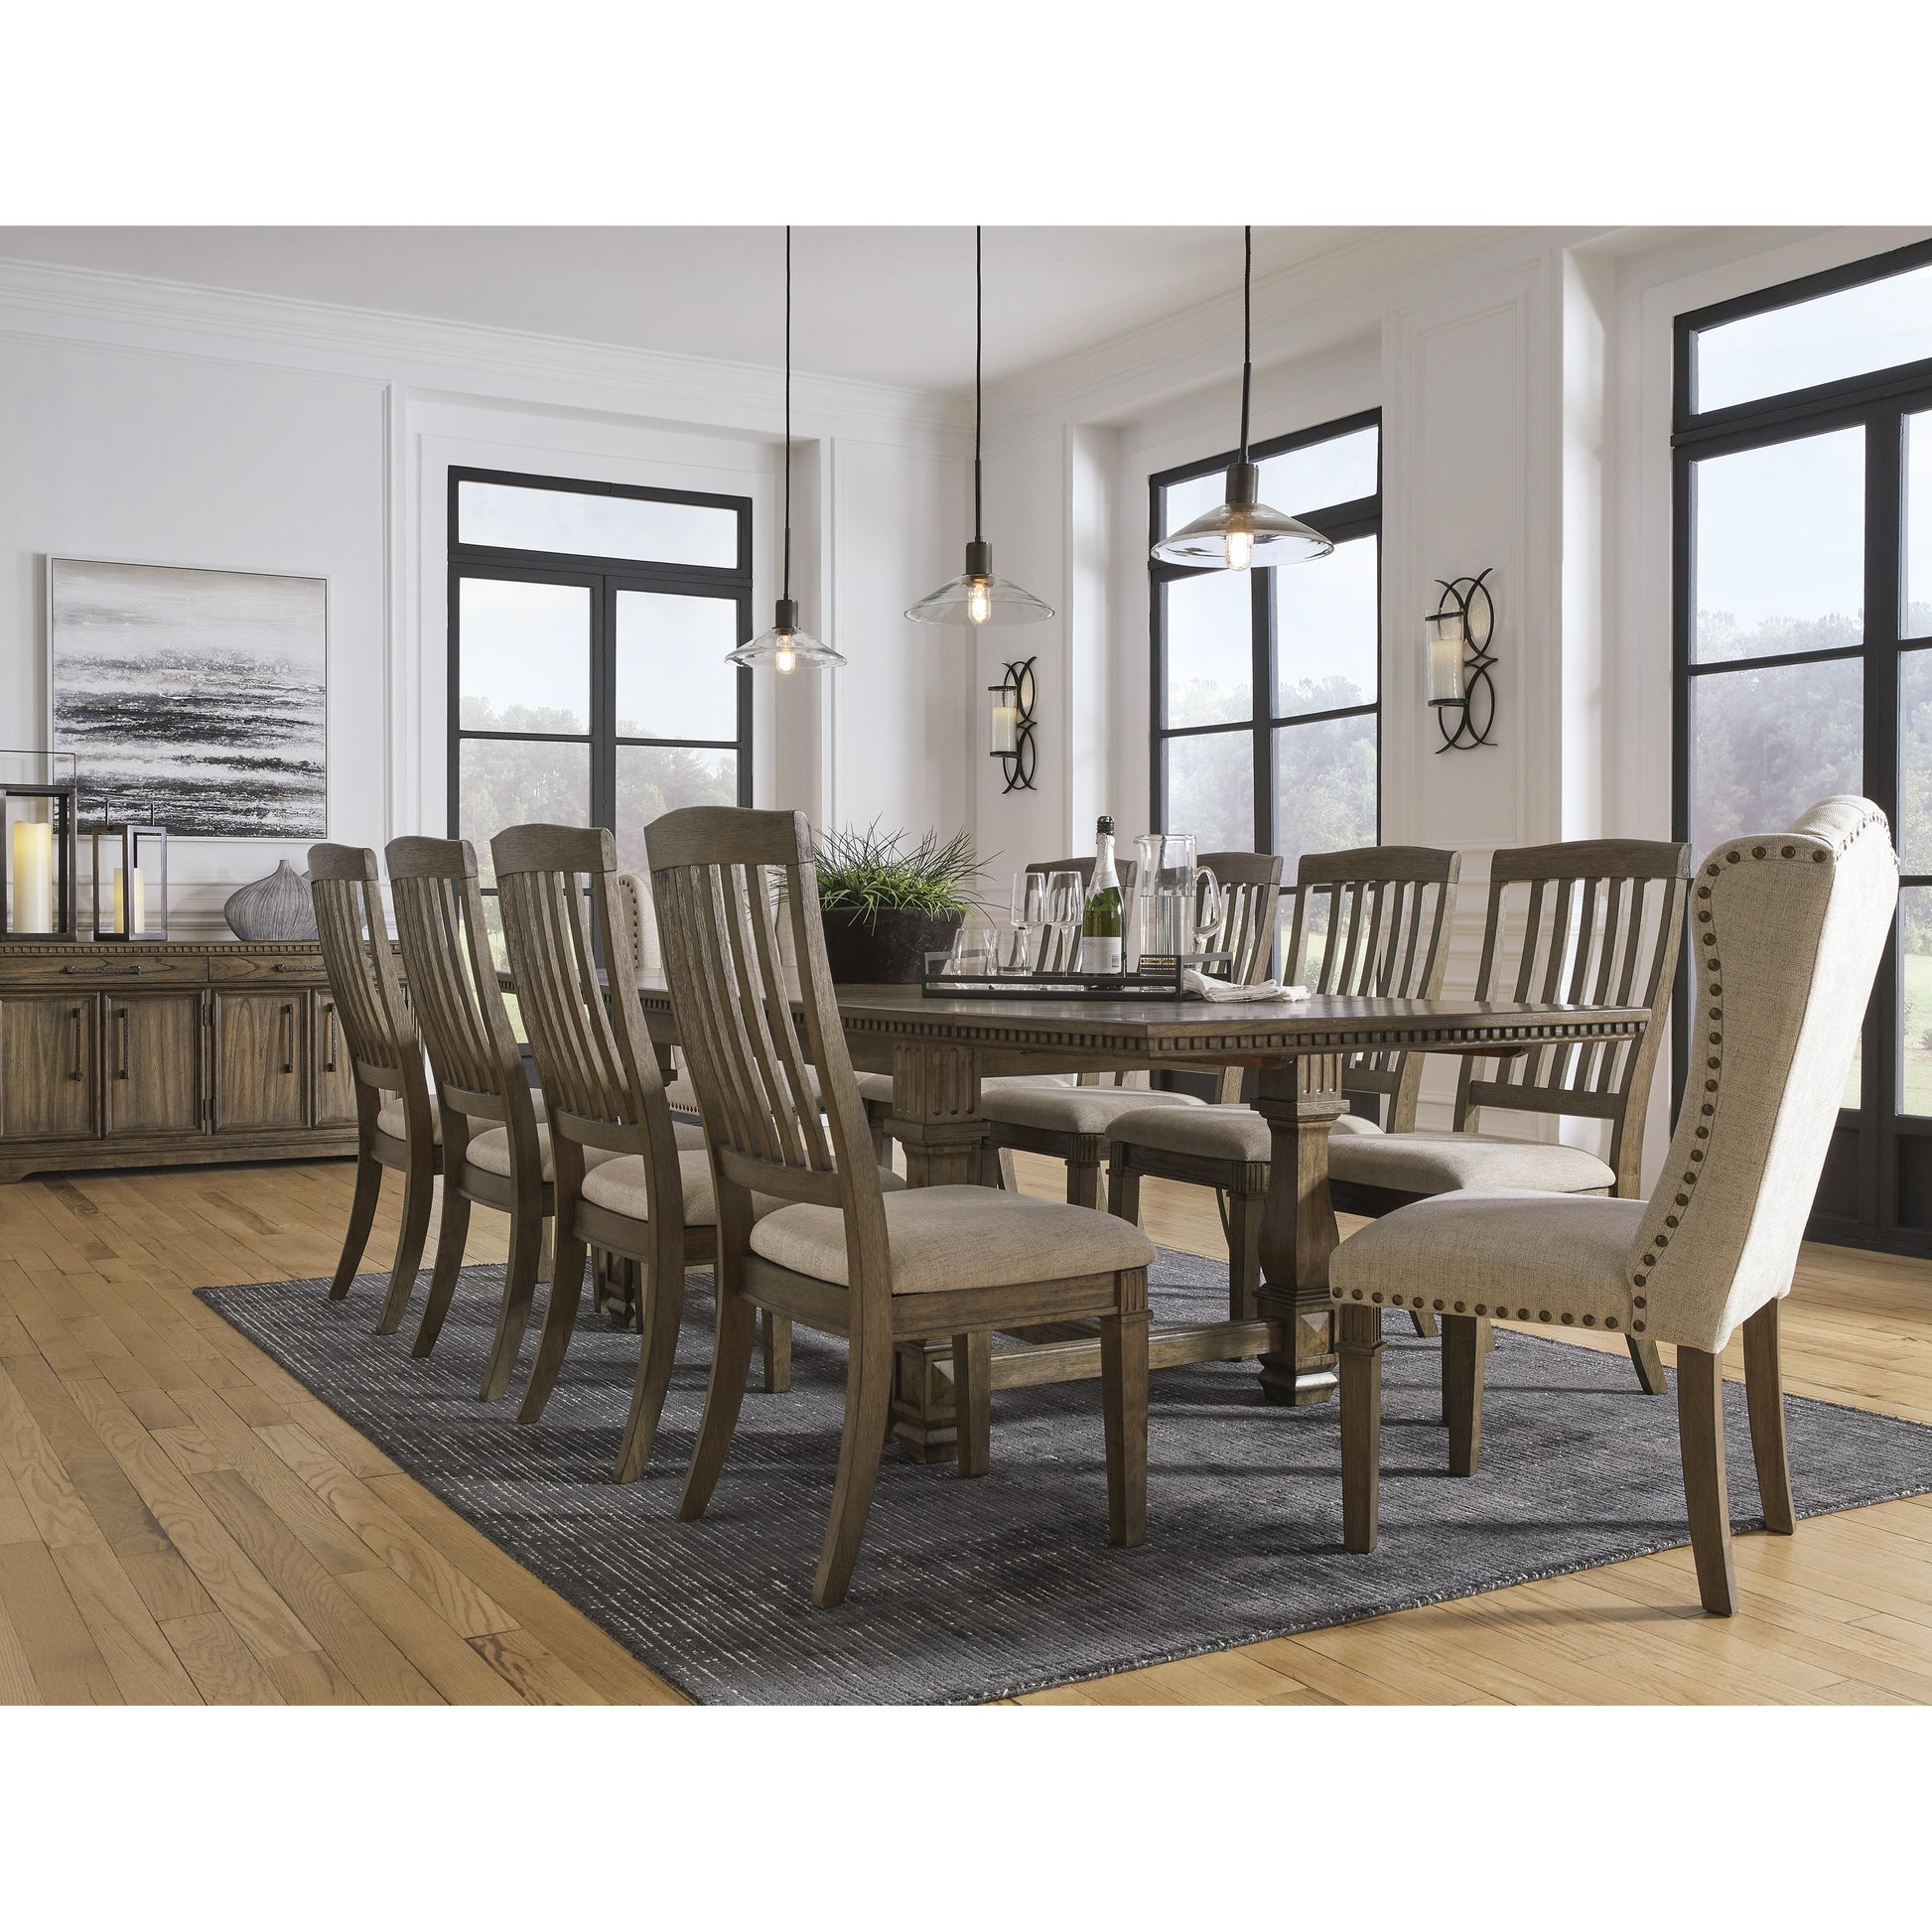 Signature Design by Ashley Markenburg Dining Chair D770-02 IMAGE 9